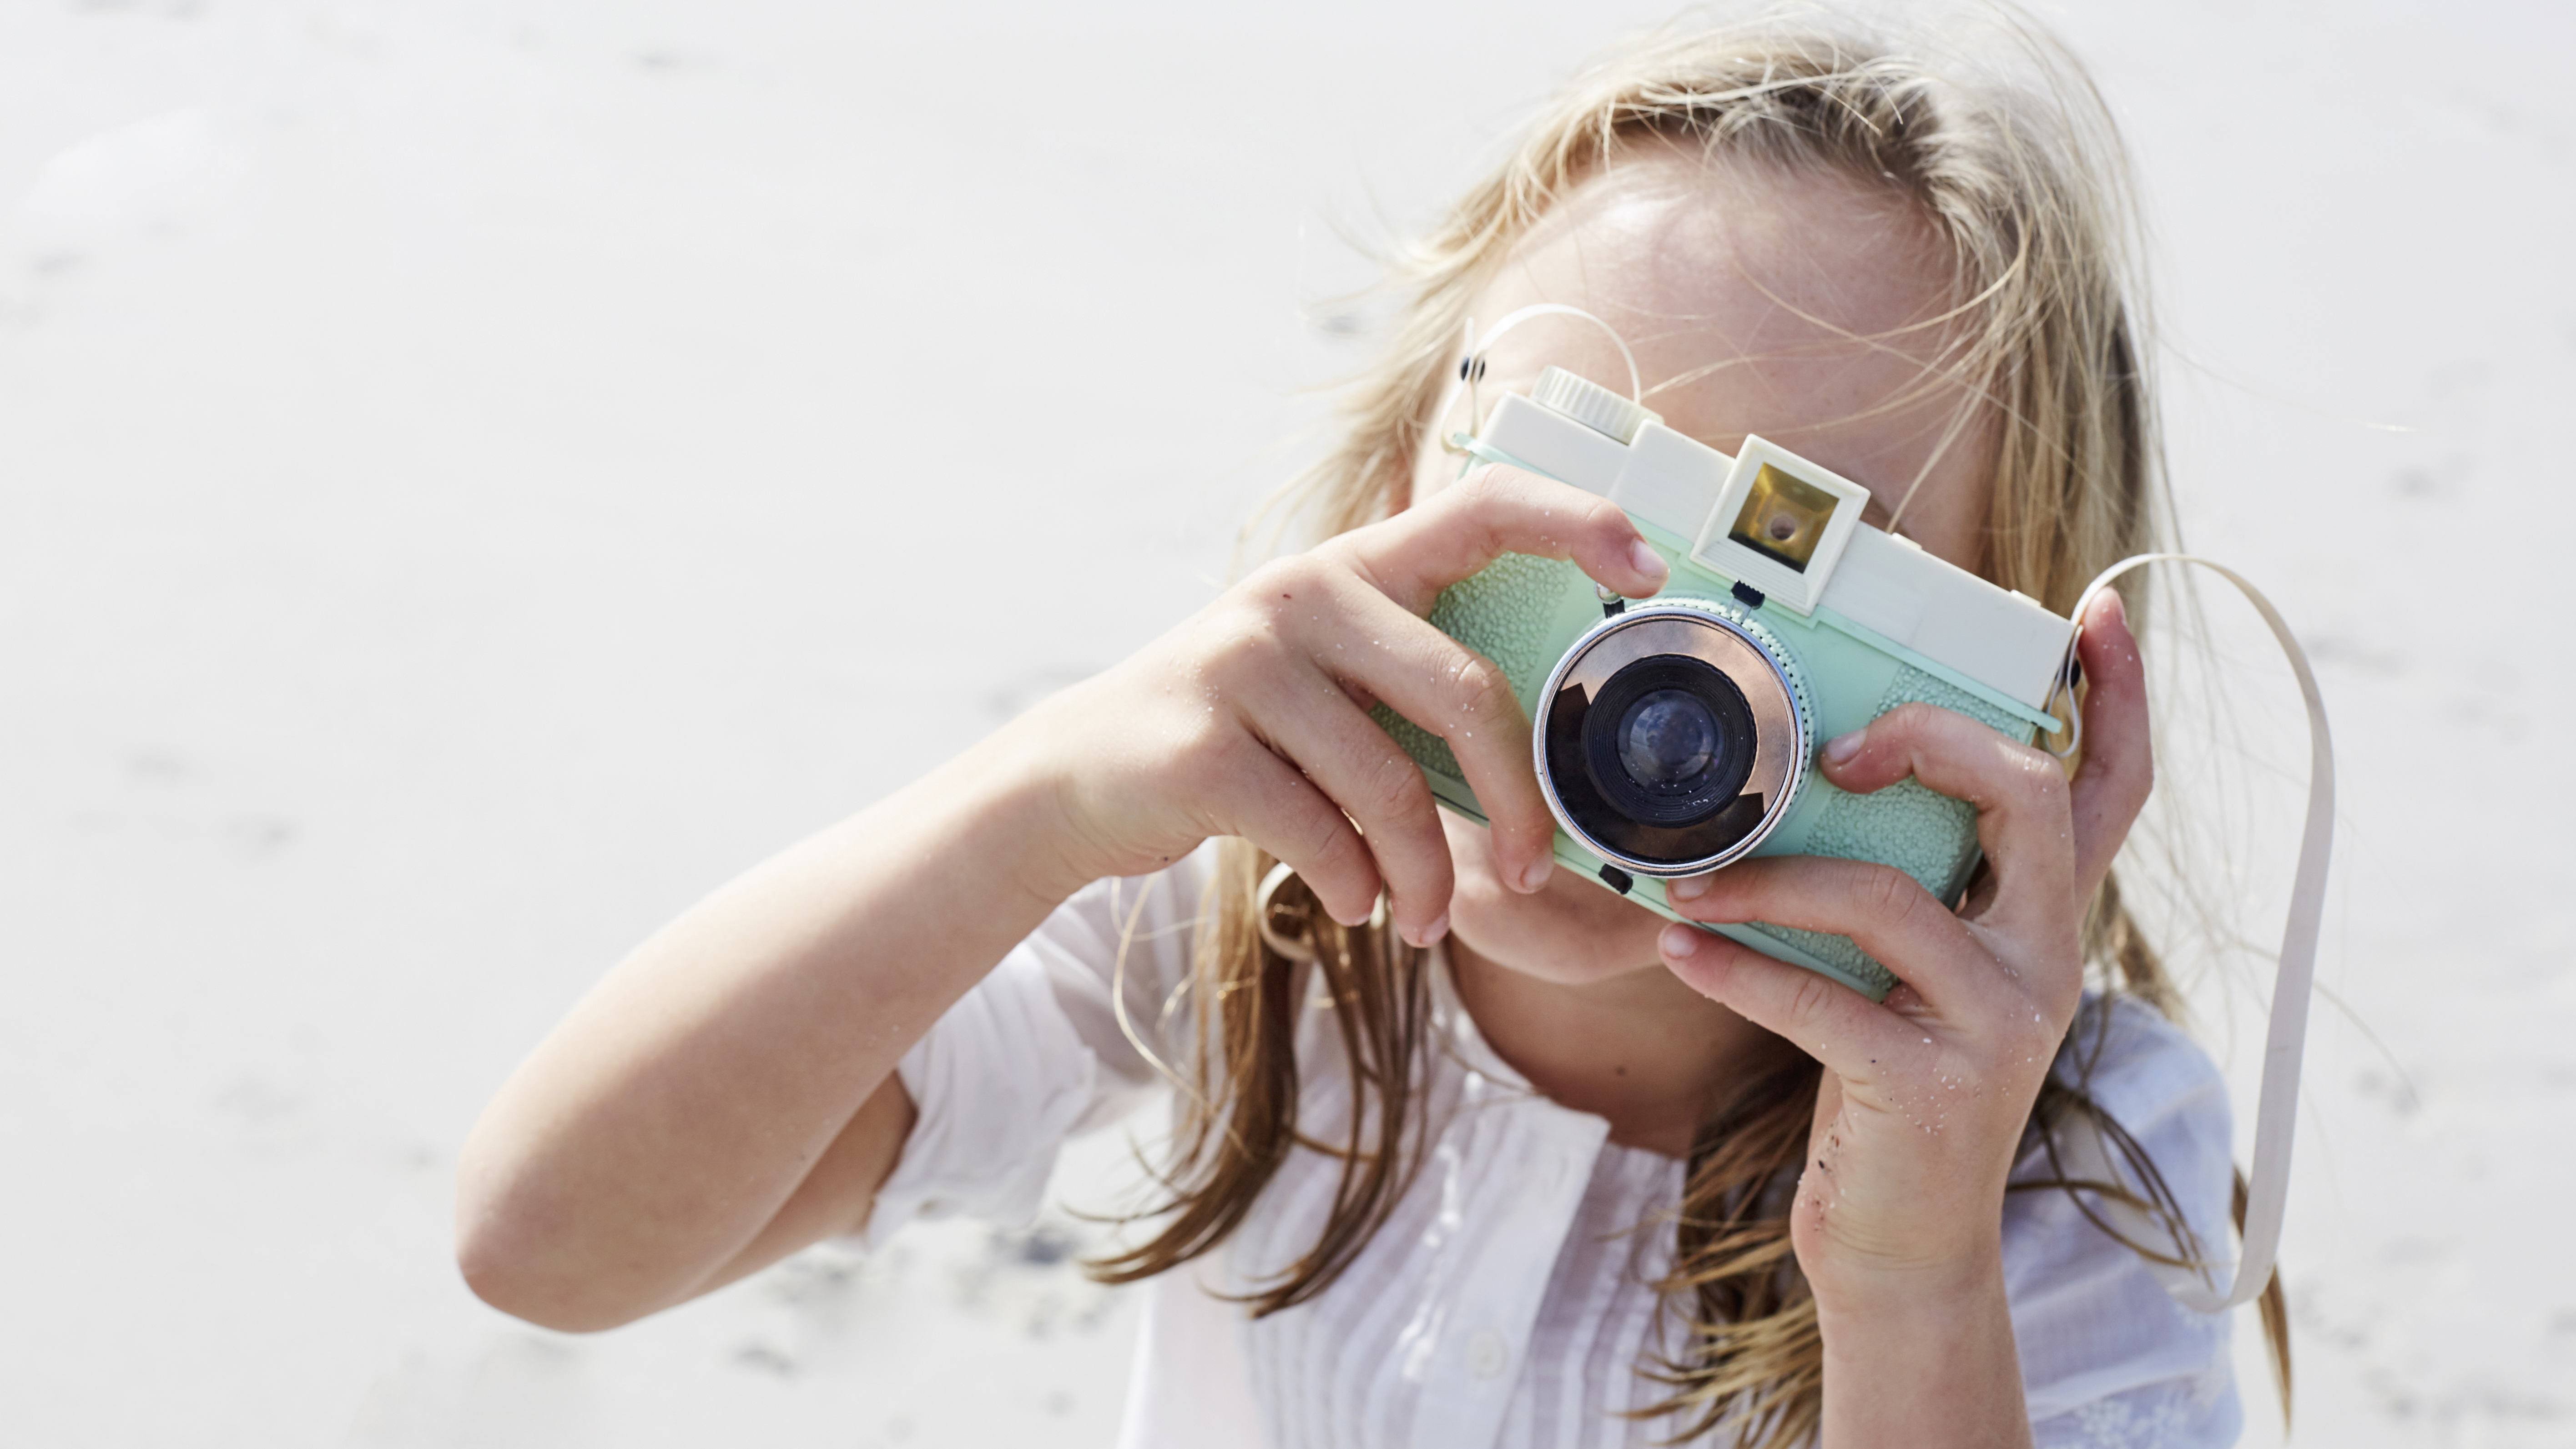 Fujifilm Instax Mini 11 review: Childhood toy camera turns out to be real